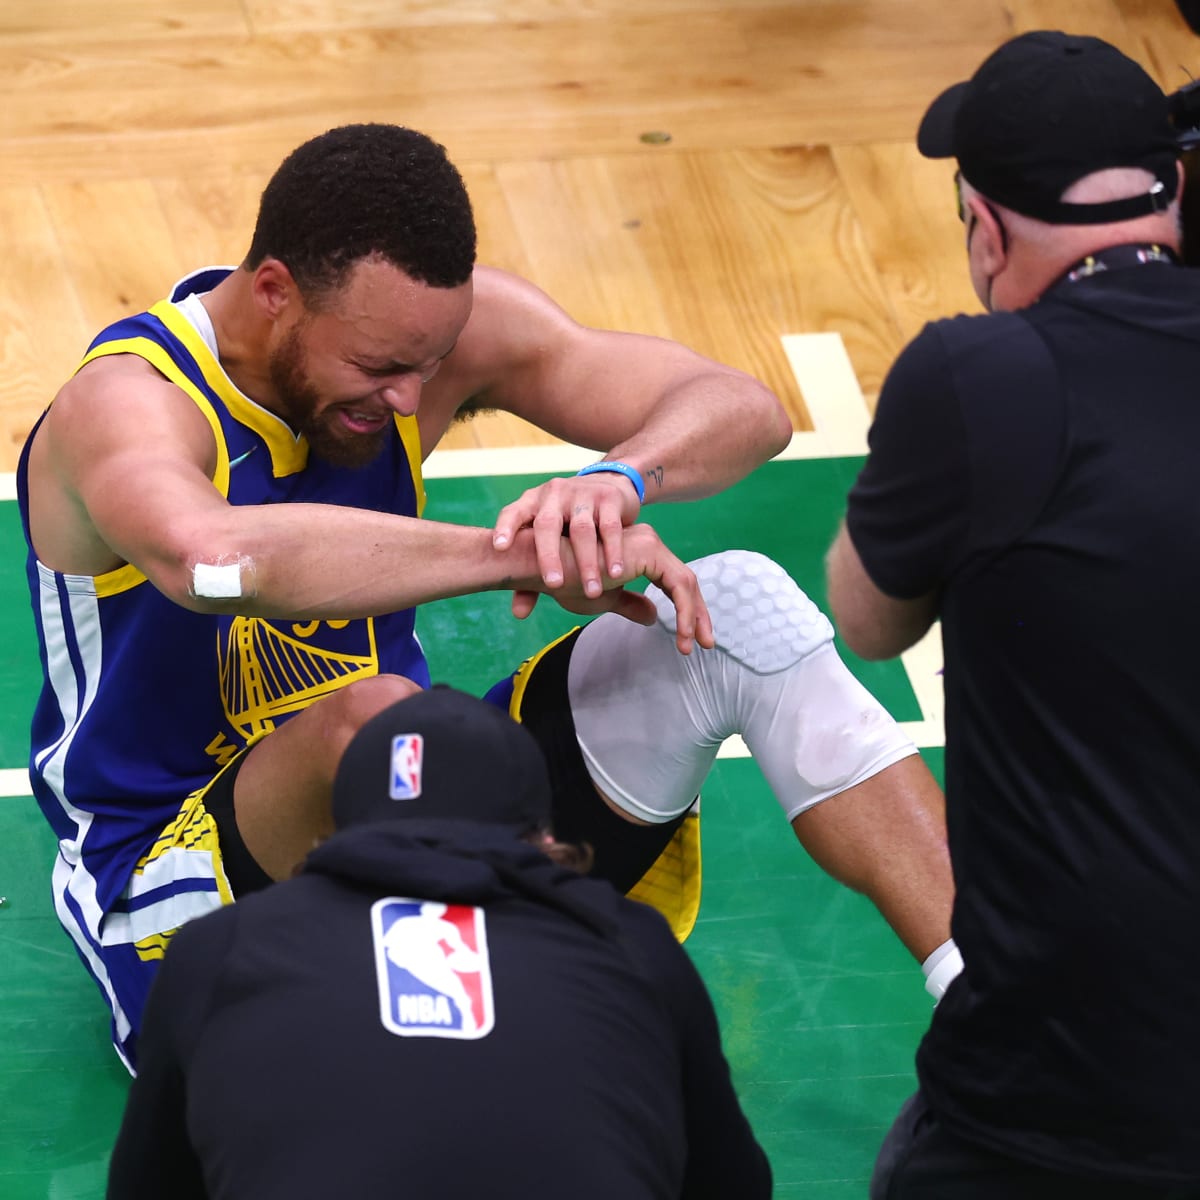 Steph Curry and the perpetual, historic and emotional rivalry with